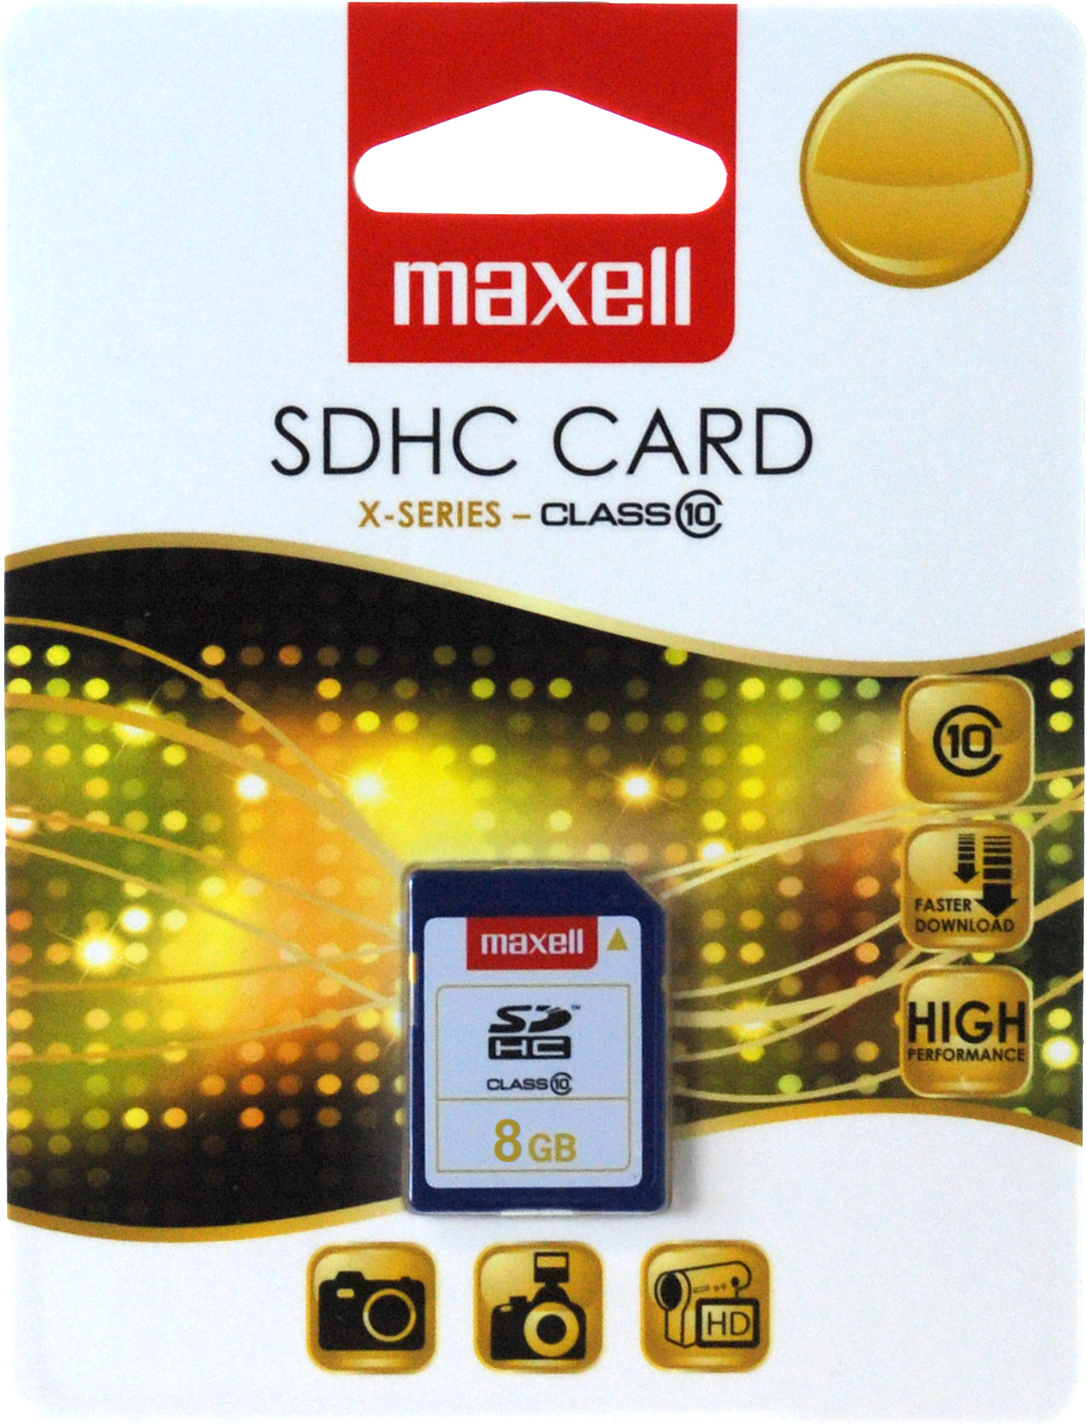 Maxell Sdhc 8gb Class 10 - Ordinateur - Main picture